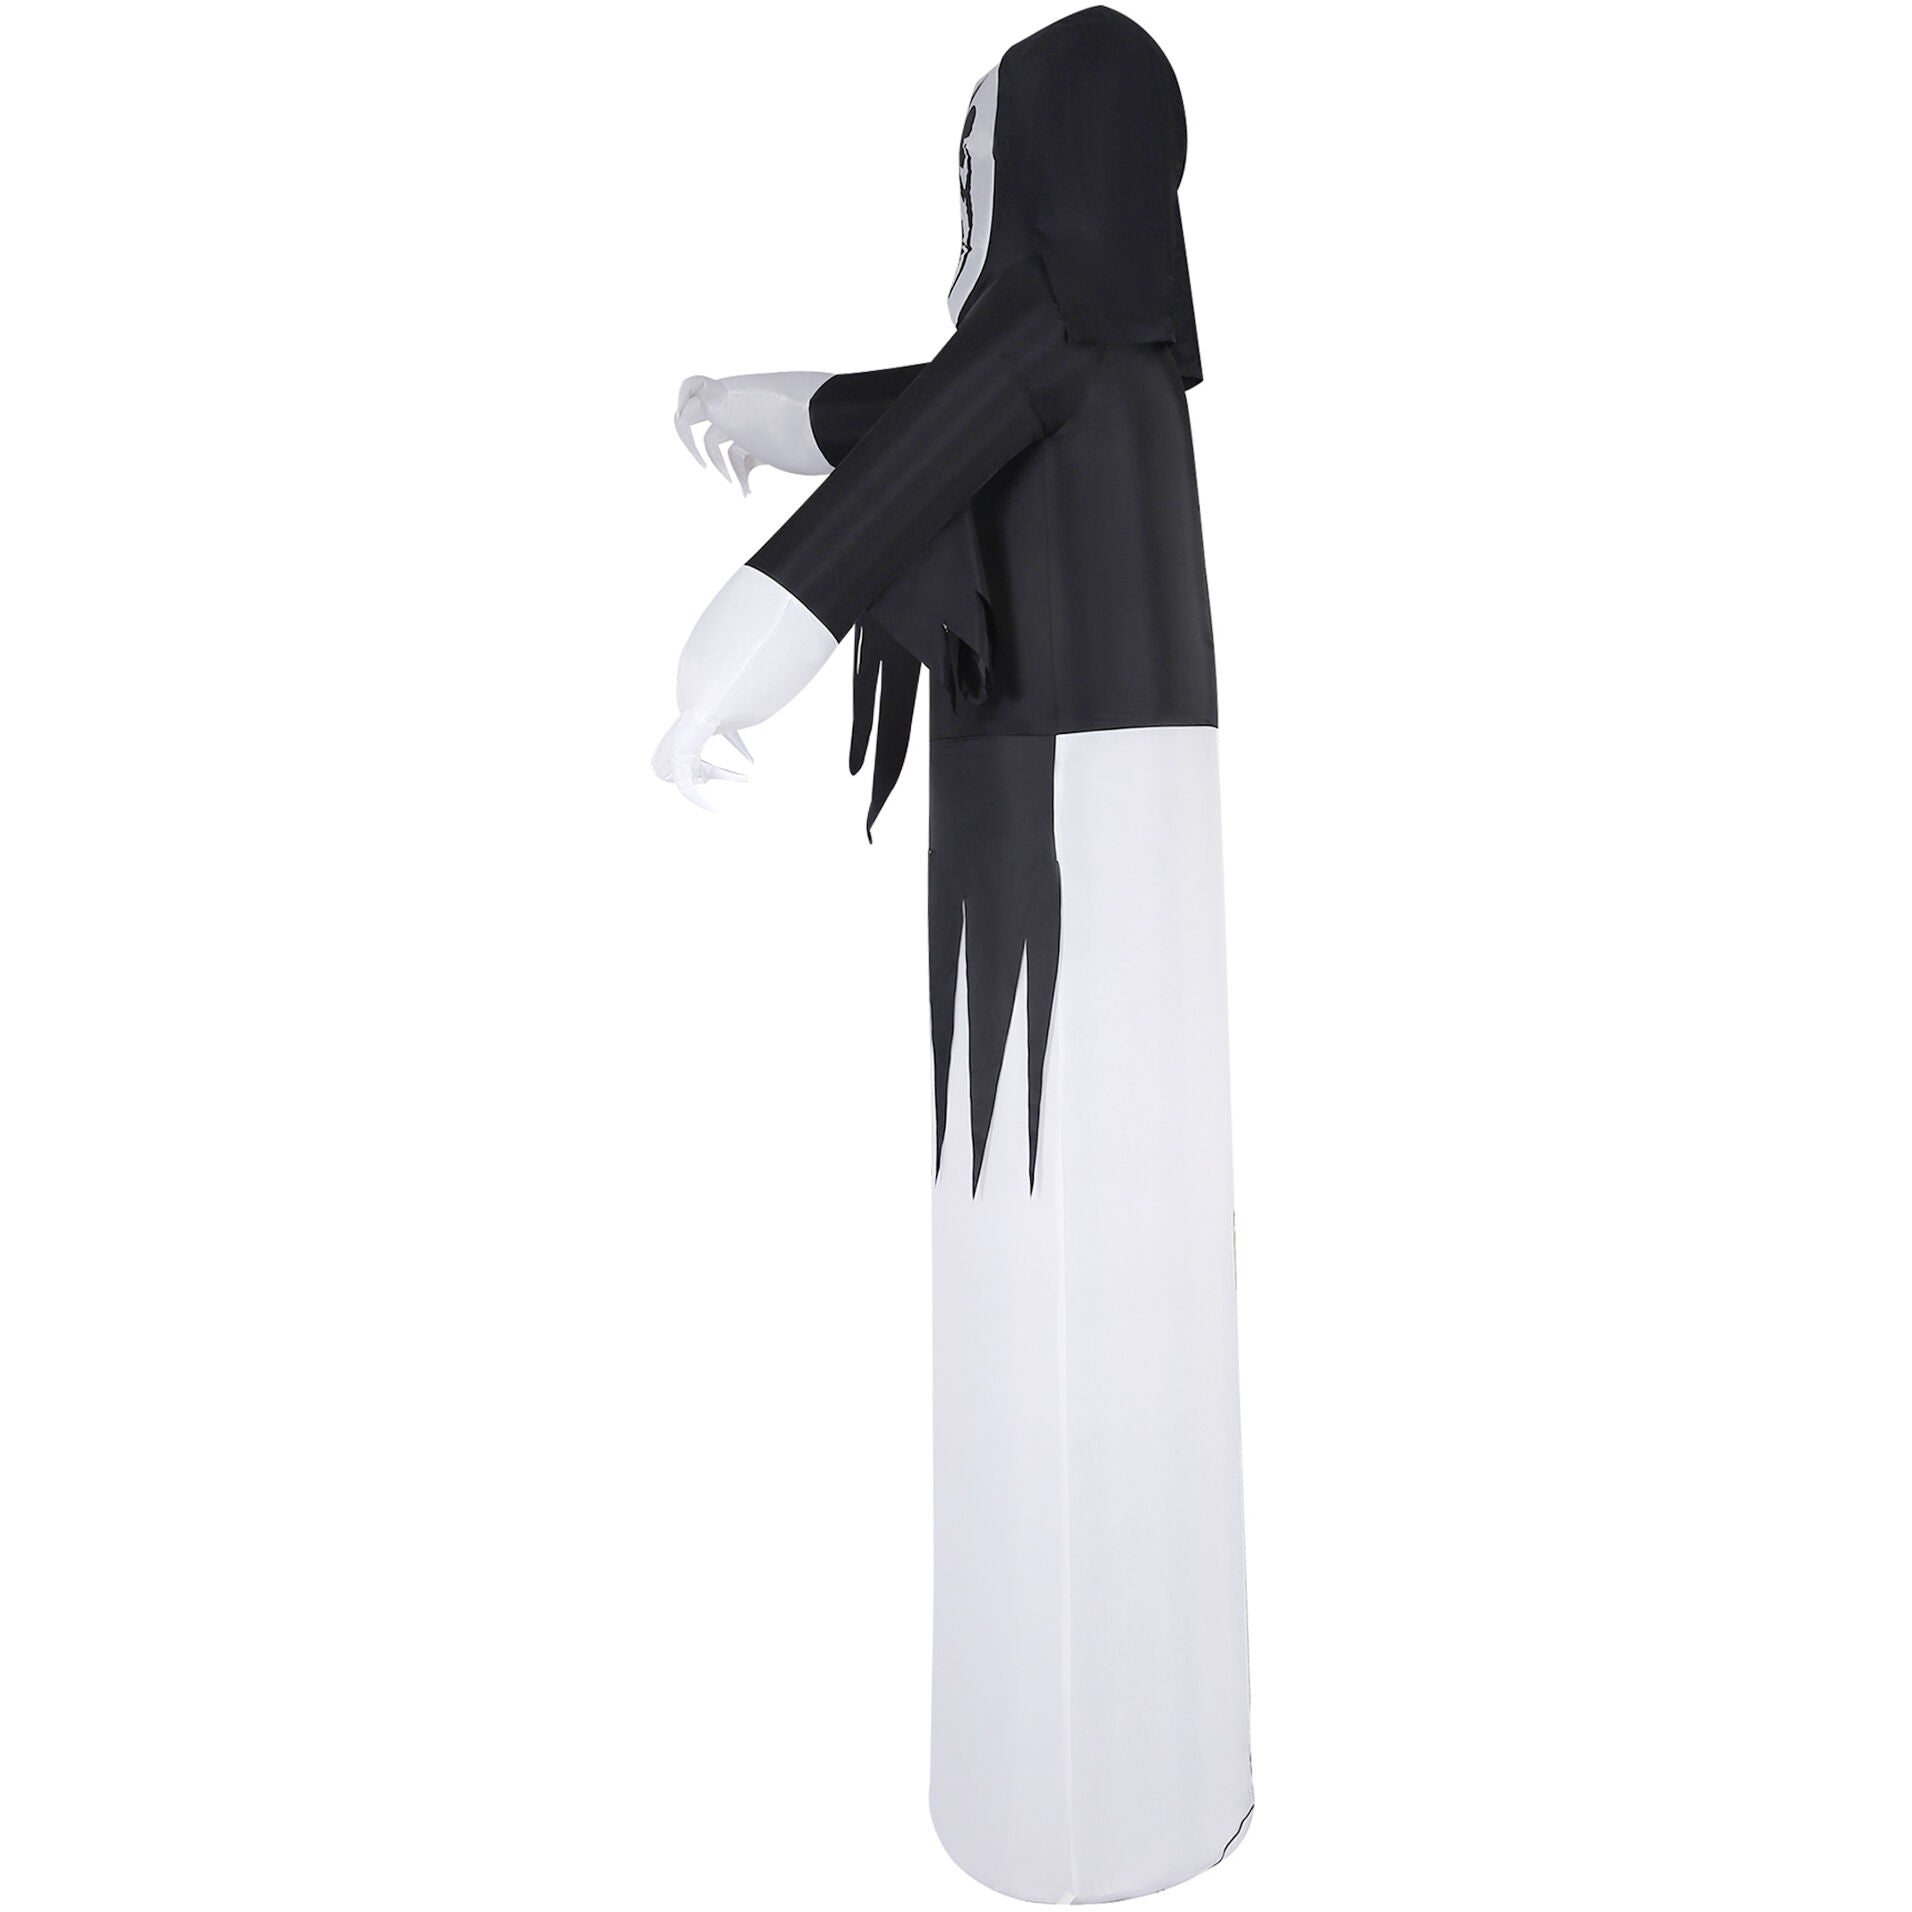 Haunted Hill Farm - 12-Ft. Tall Pre-lit Inflatable Grim Reaper